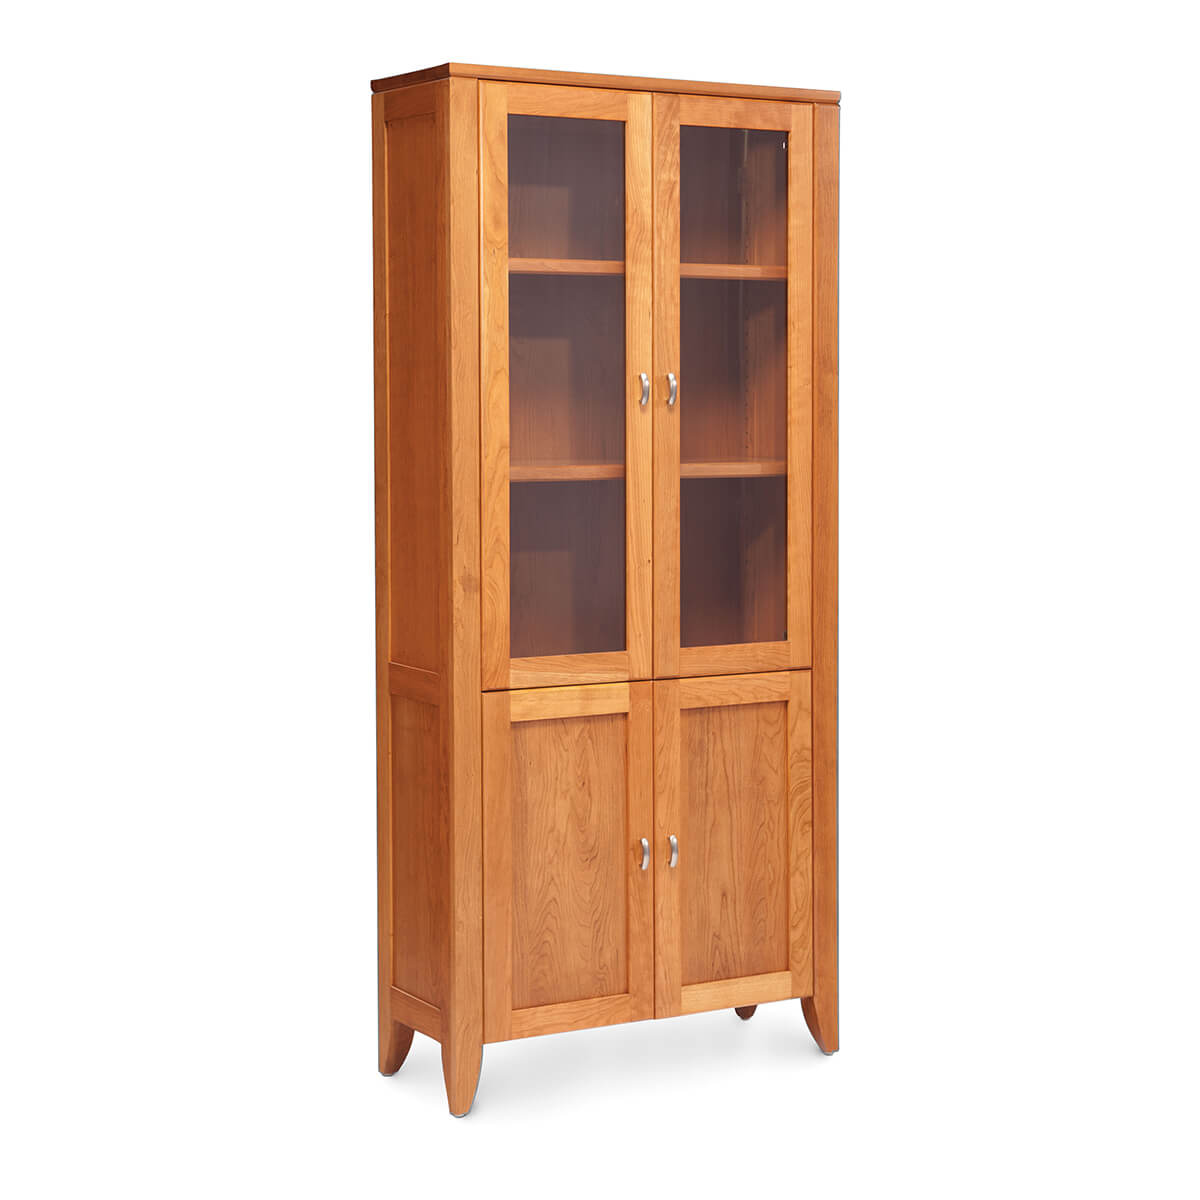 Read more about the article Justine Bookcase With Glass Doors On Top And Wood Doors On Bottom